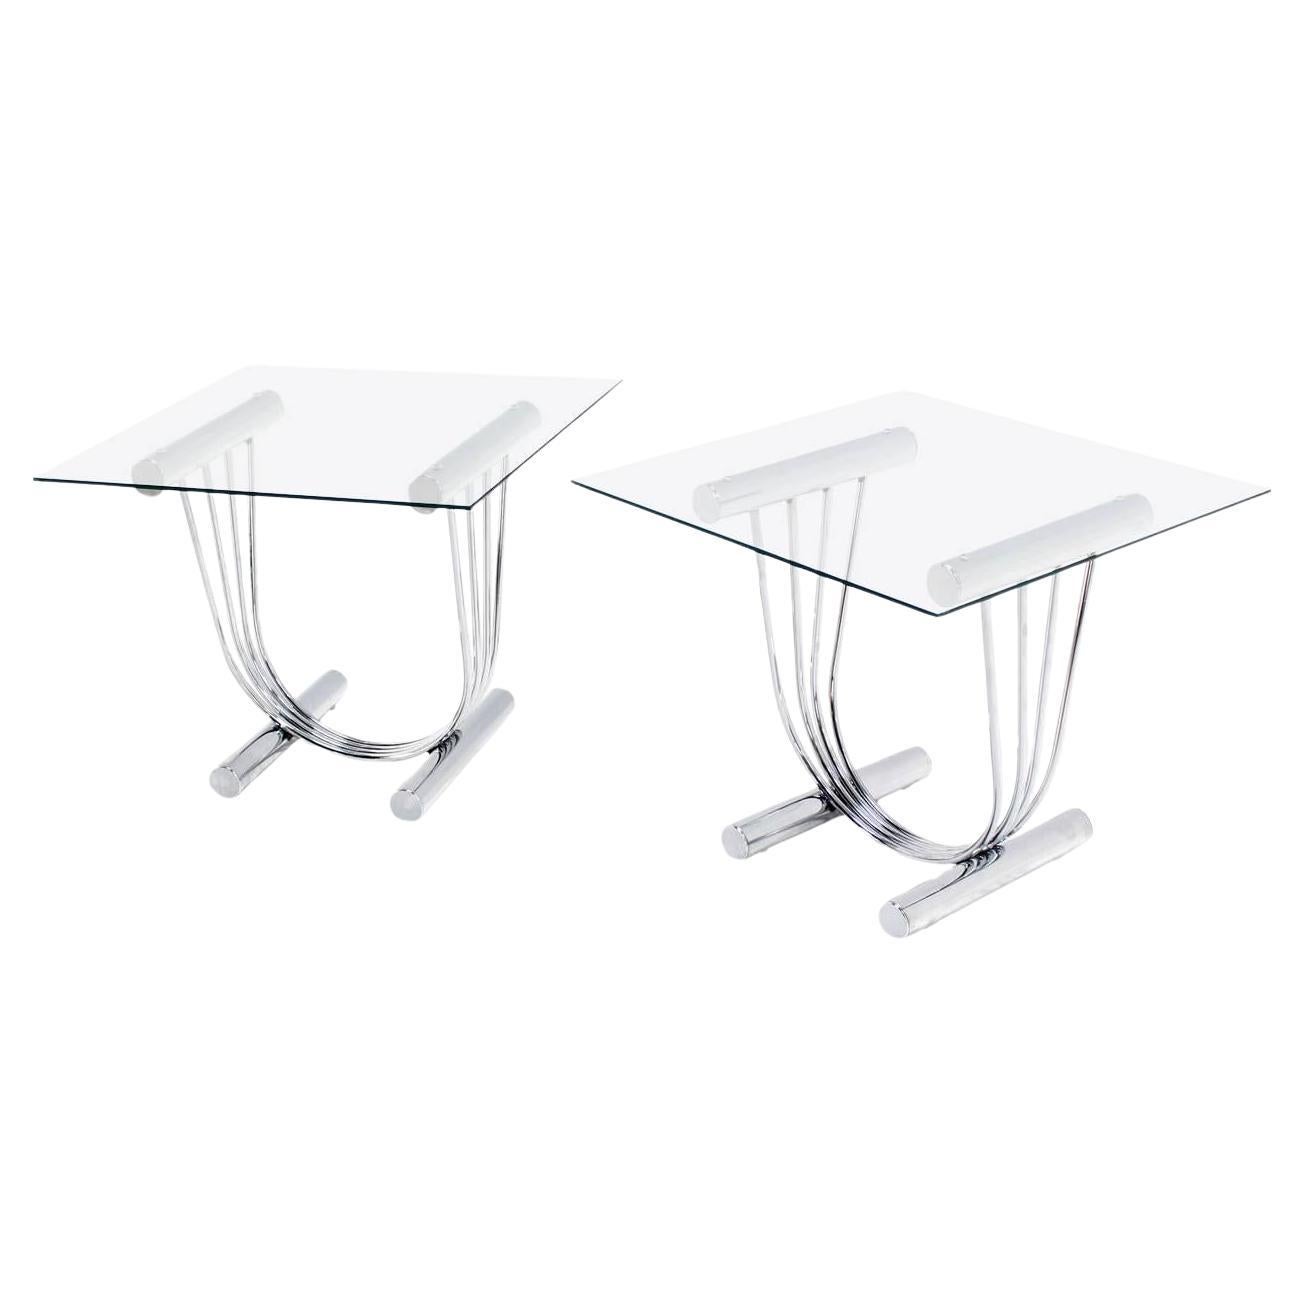 Pair of Chrome U Shape Bases Glass Square Top End Side Tables Stands MINT!